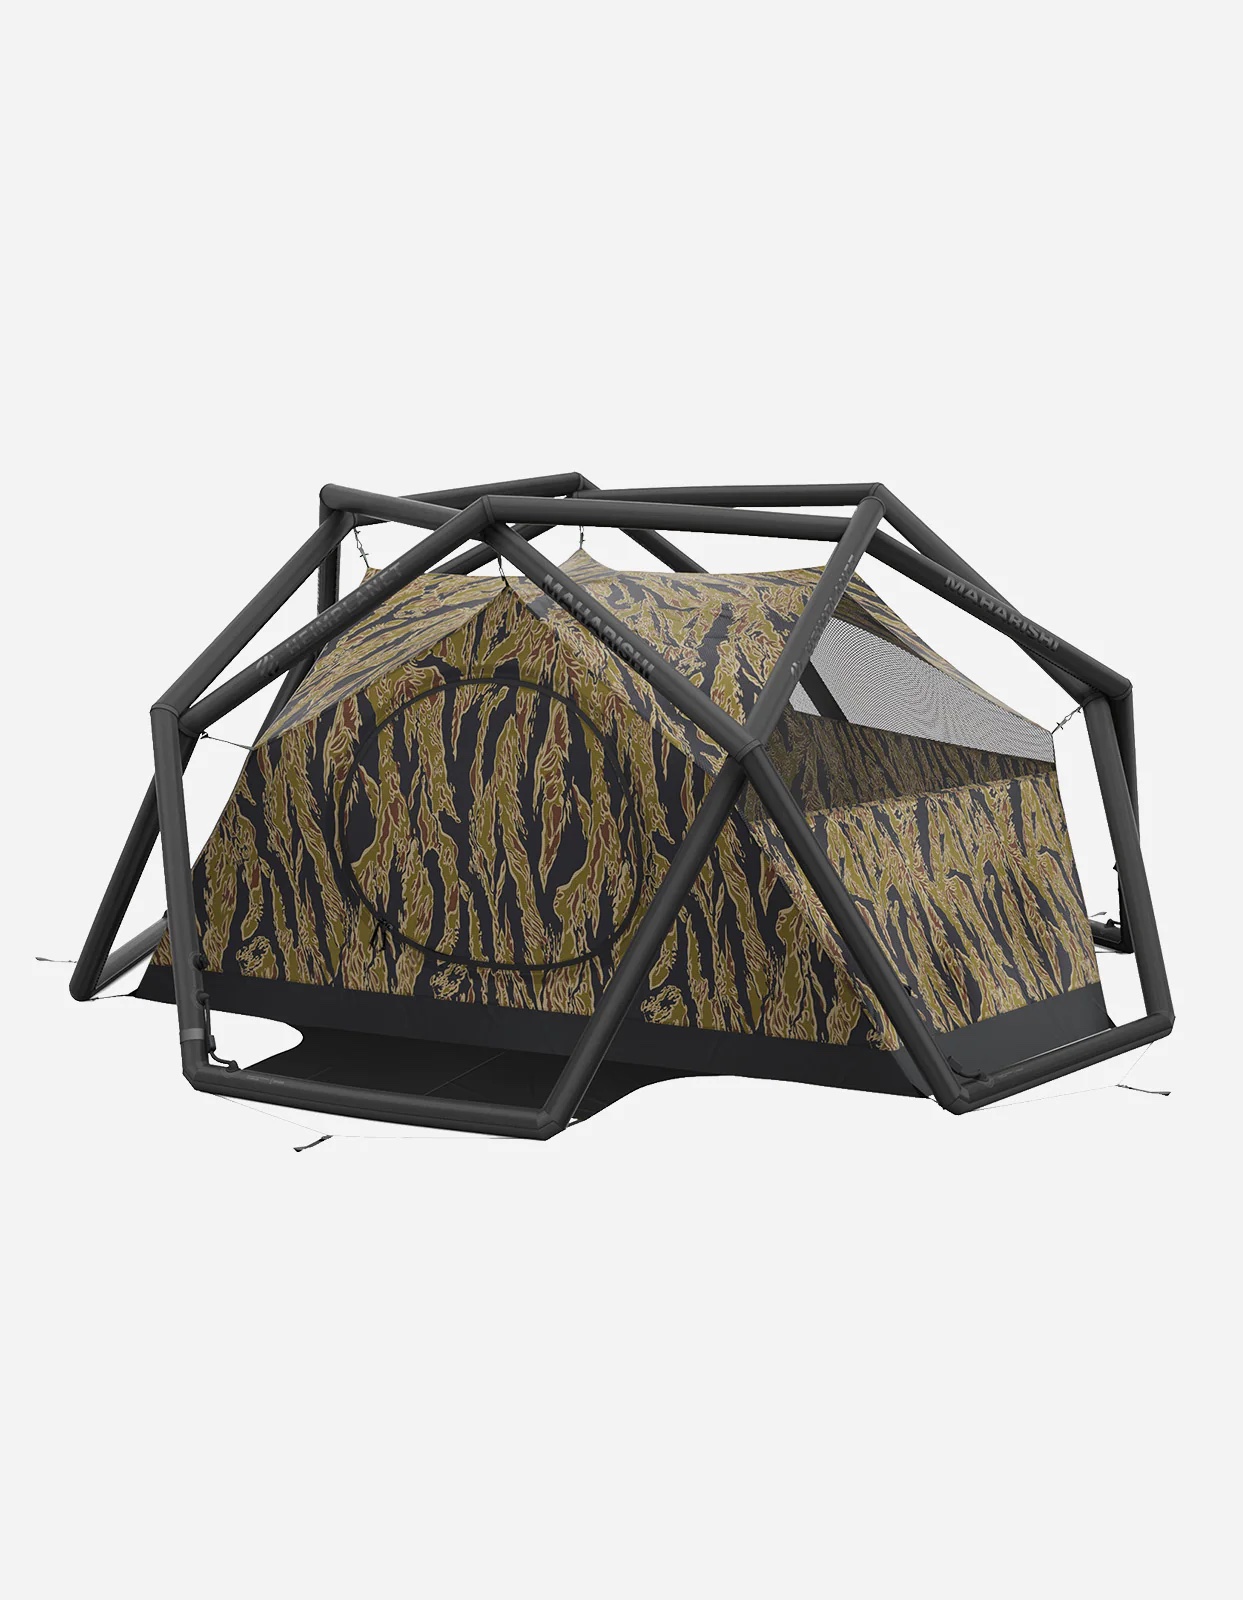 The Cave Tent by Heimplanet + Maharishi